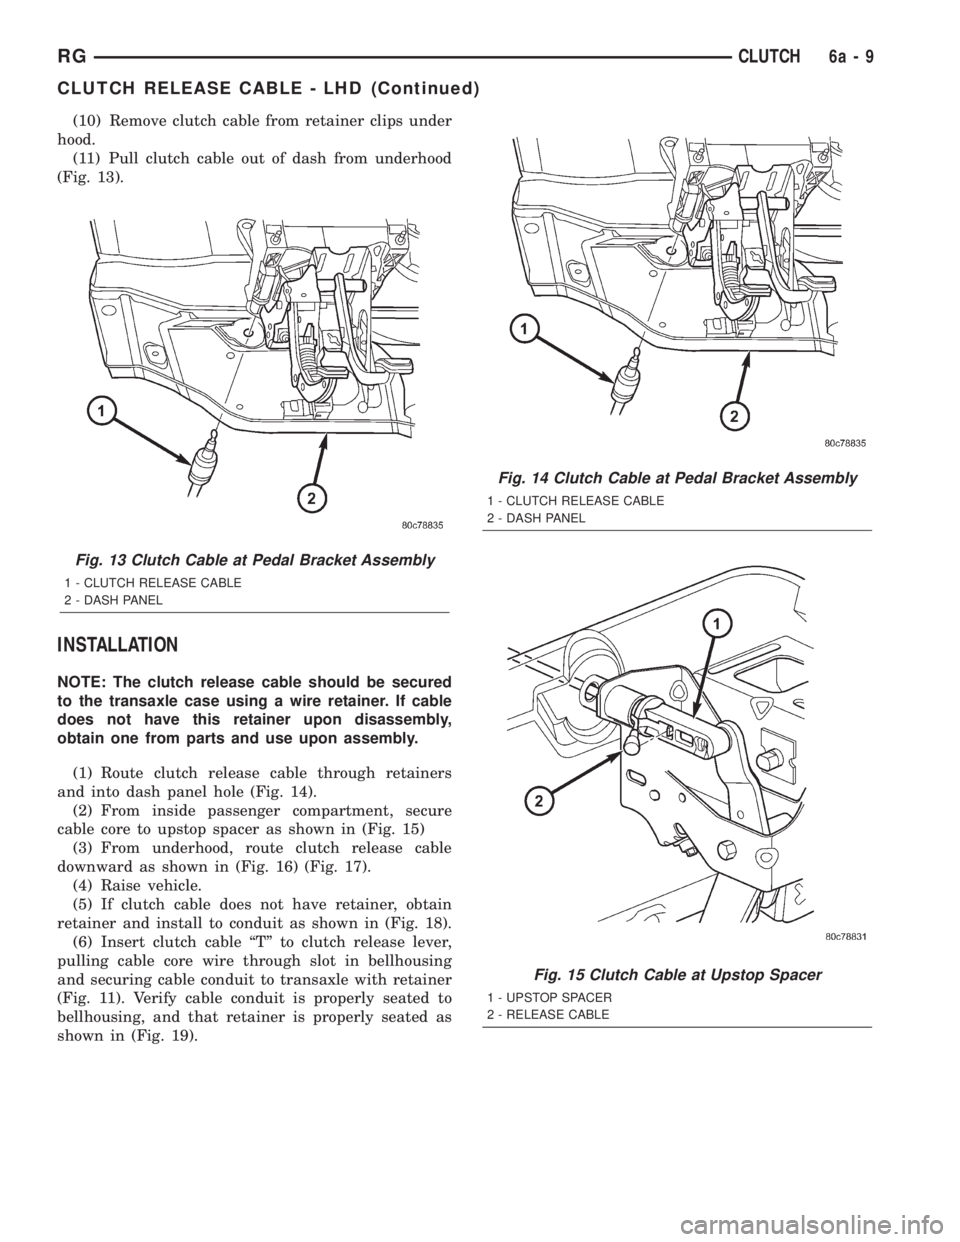 CHRYSLER VOYAGER 2001  Service Manual (10) Remove clutch cable from retainer clips under
hood.
(11) Pull clutch cable out of dash from underhood
(Fig. 13).
INSTALLATION
NOTE: The clutch release cable should be secured
to the transaxle cas